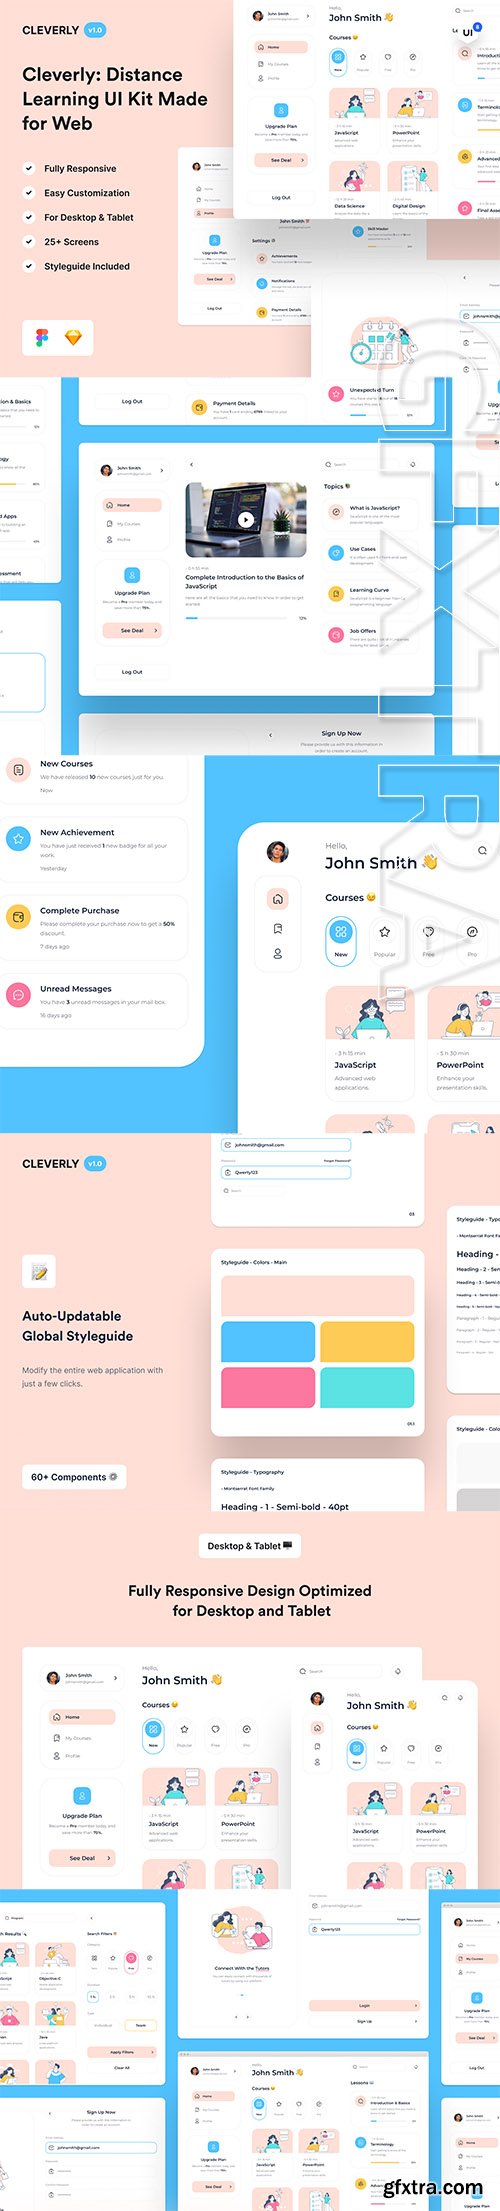 Cleverly: Distance Learning Web UI Kit